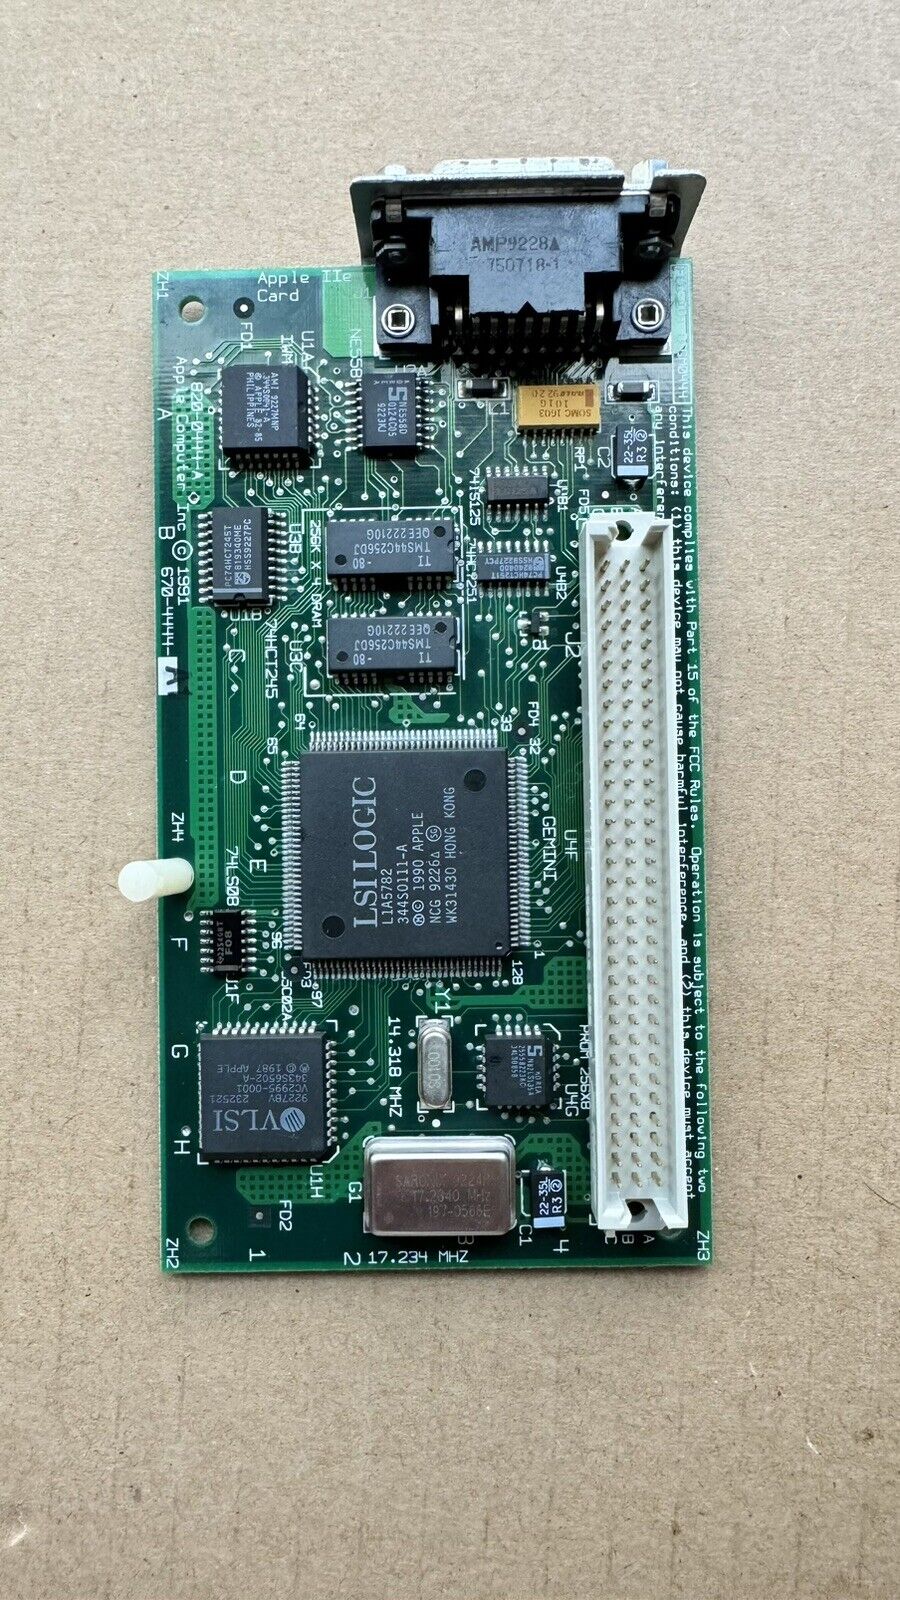 Recapped Apple IIe Card For LC Macintosh.